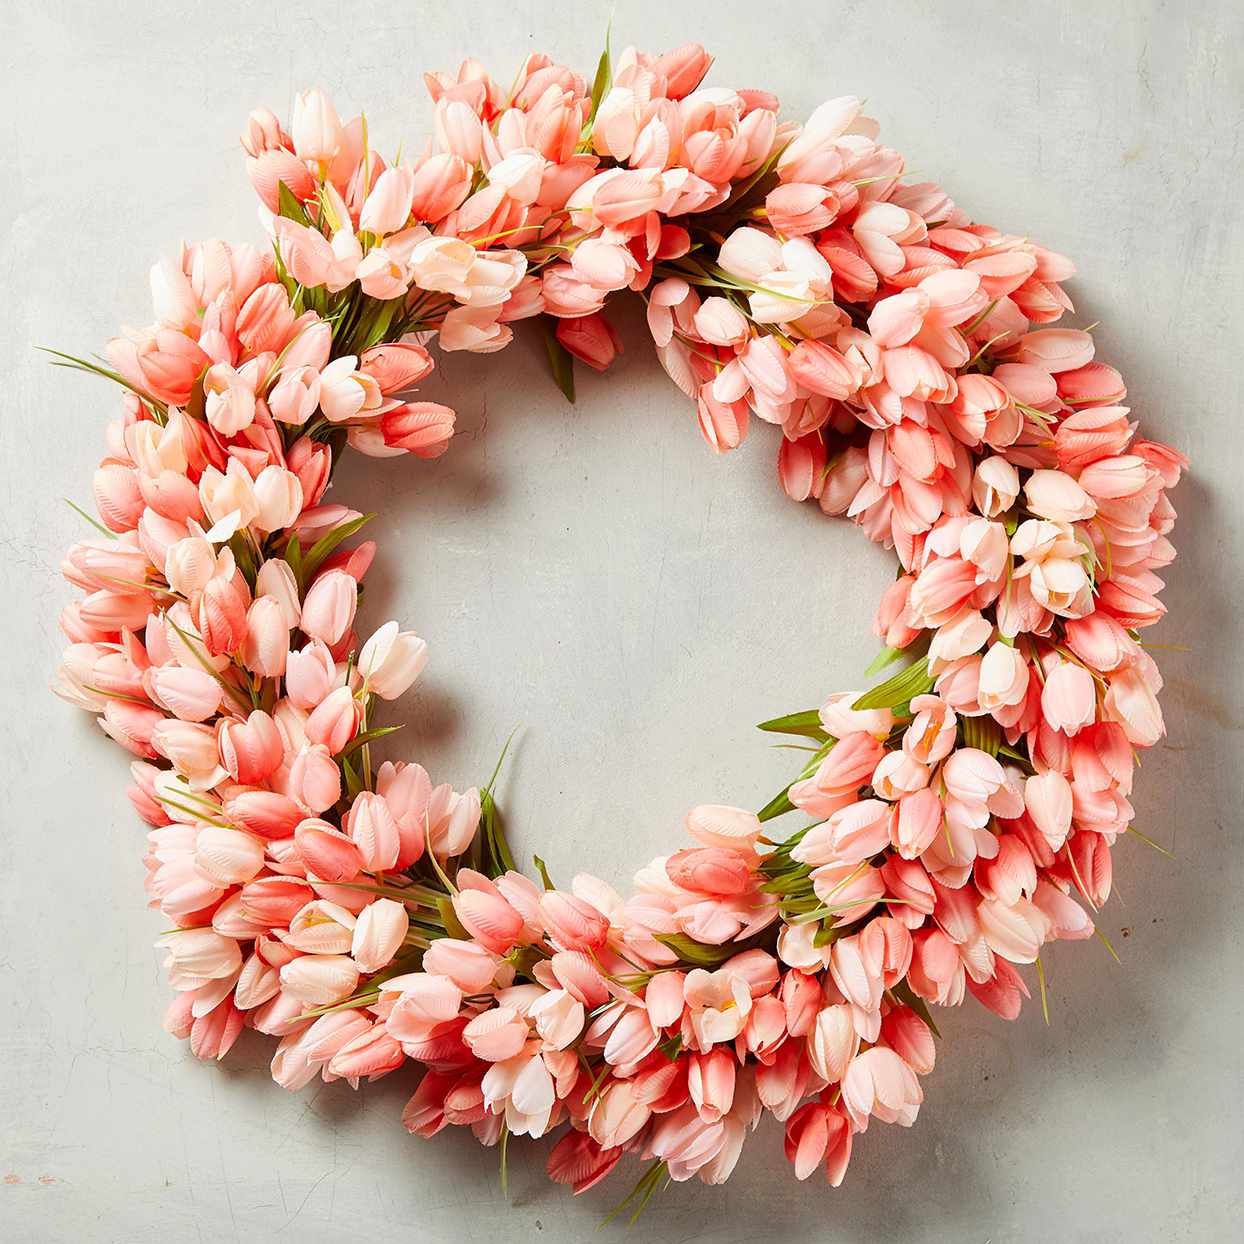 fineshelf Tulip Wreath Artificial Flower Door Wreath Floral Twig Spring Wreath for Easter Wreath Gift Mothers Day Wedding Party Decoration Wall Hanging Ornament